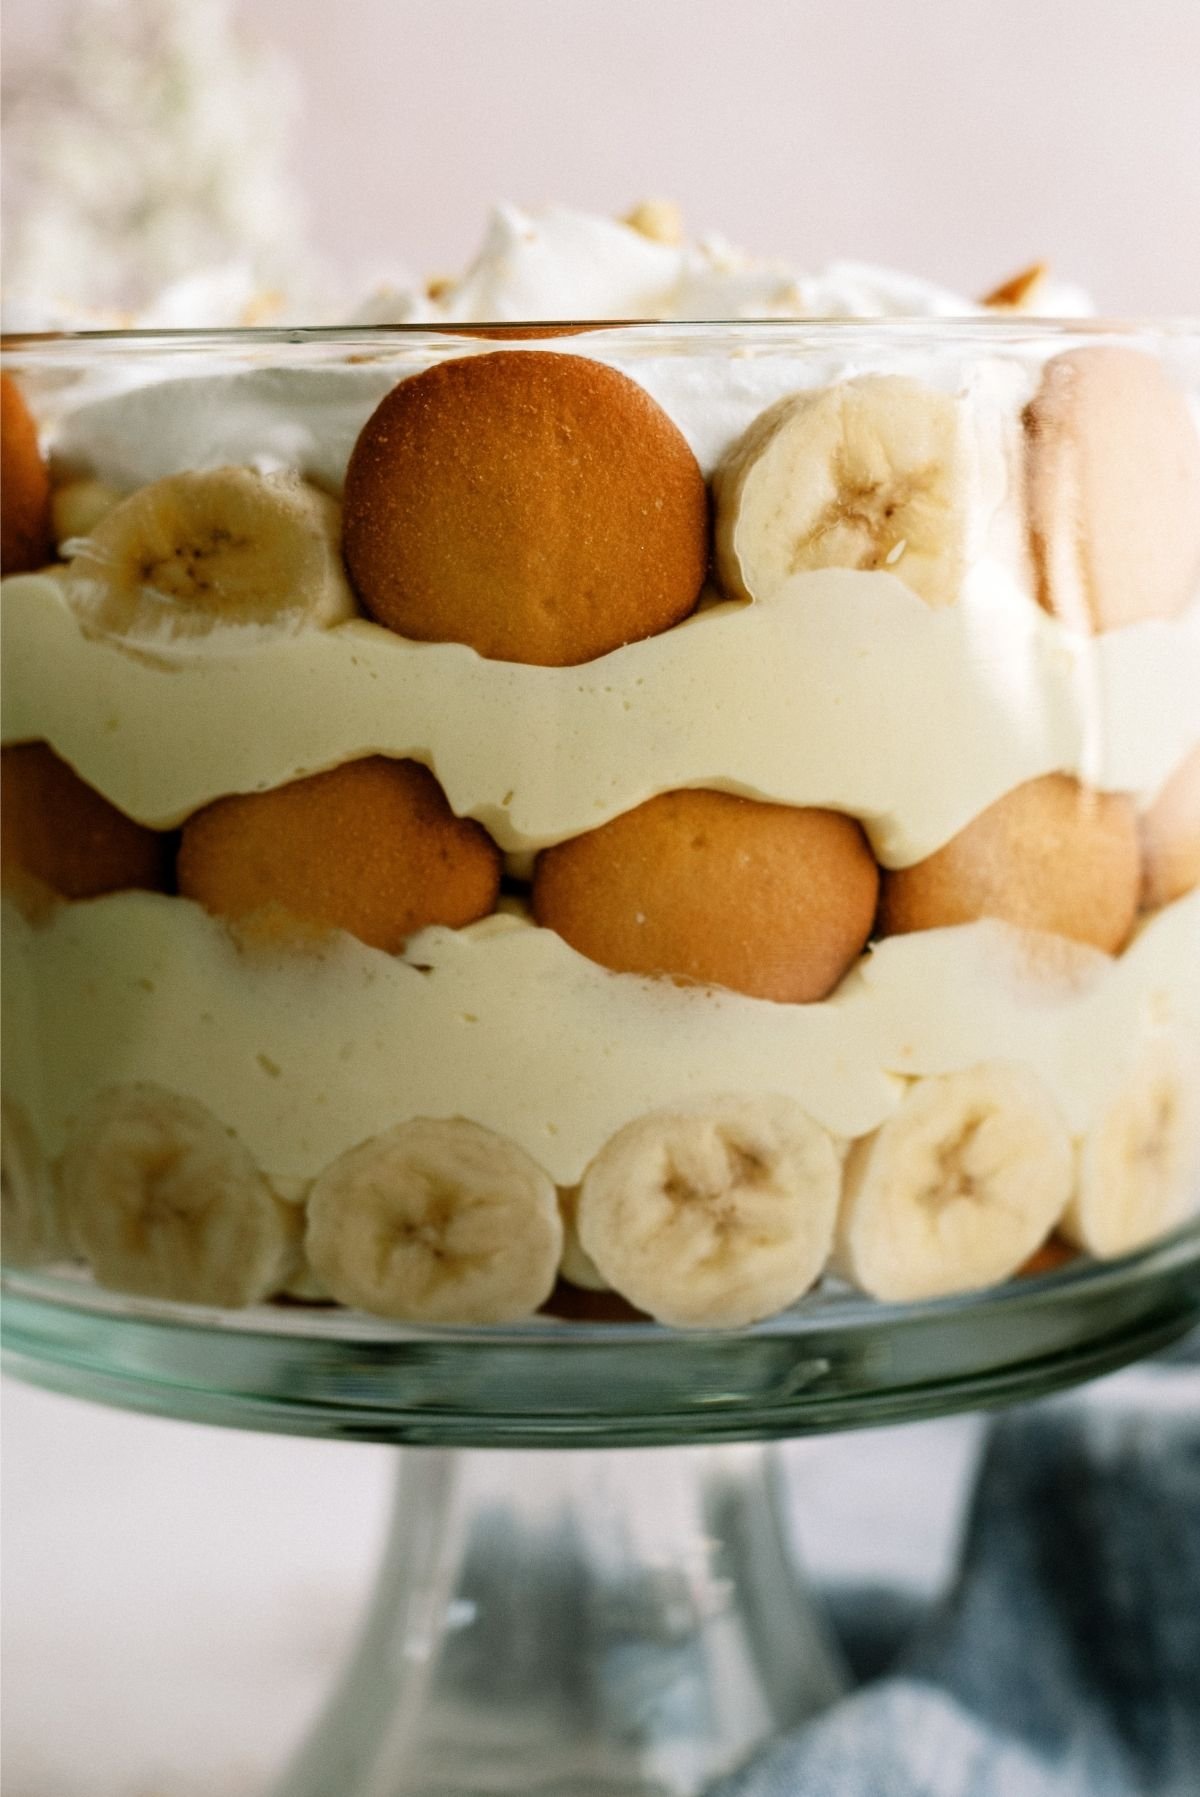 The Best Banana Pudding (Trifle) Recipe